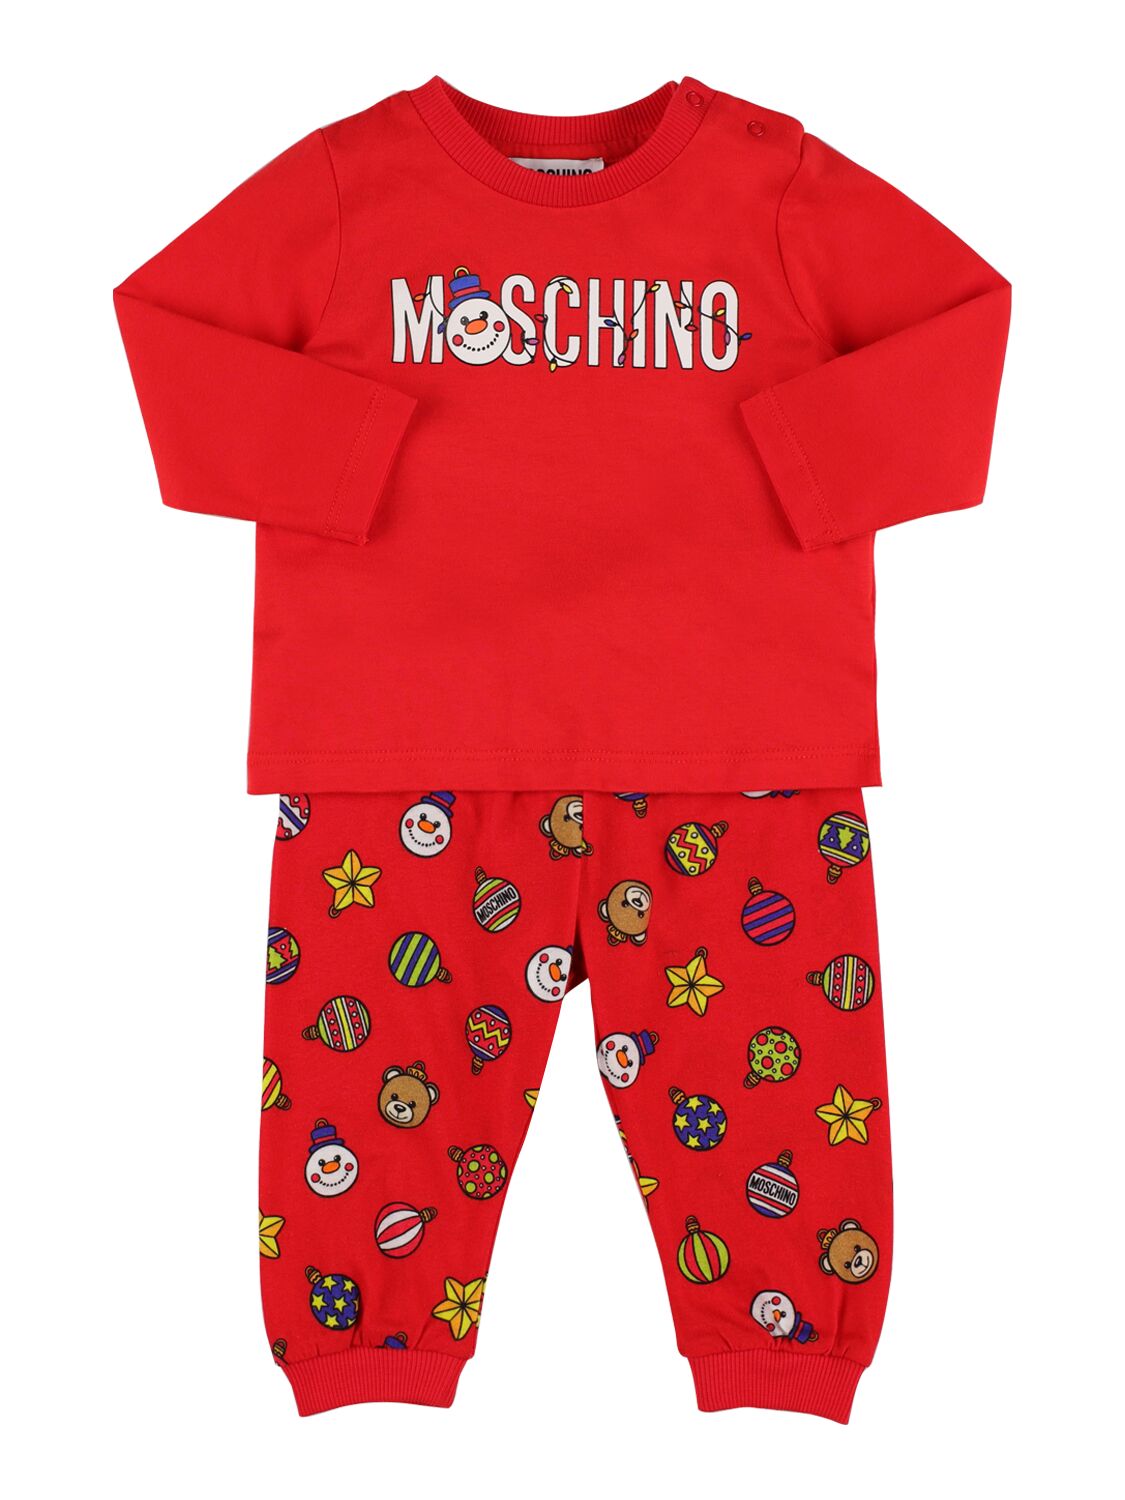 Moschino Kids' Printed Cotton Jersey T-shirt & Pants In Red